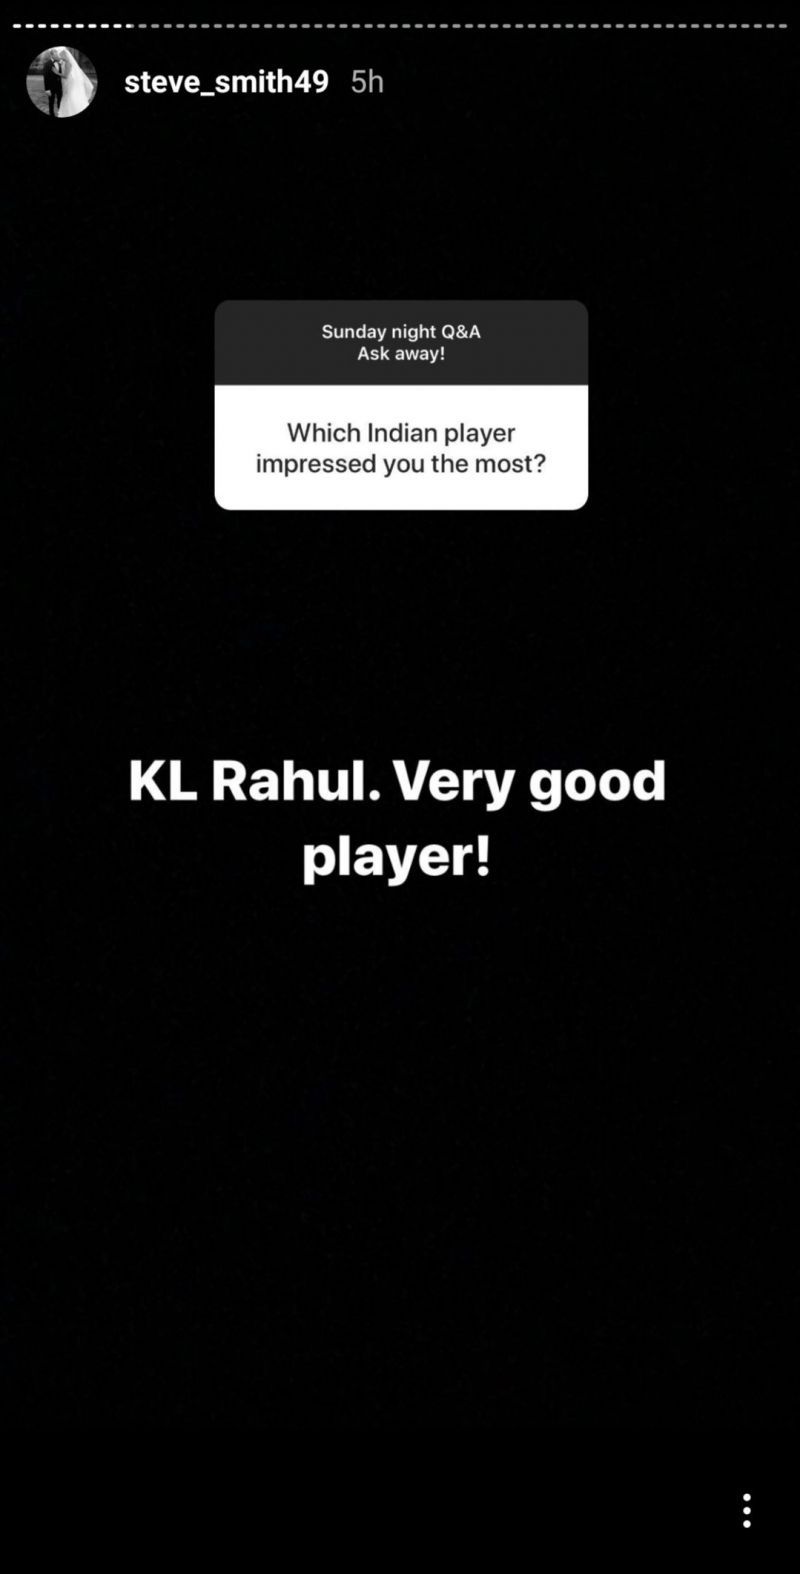 Steve Smith named KL Rahul as the most impressive Indian player